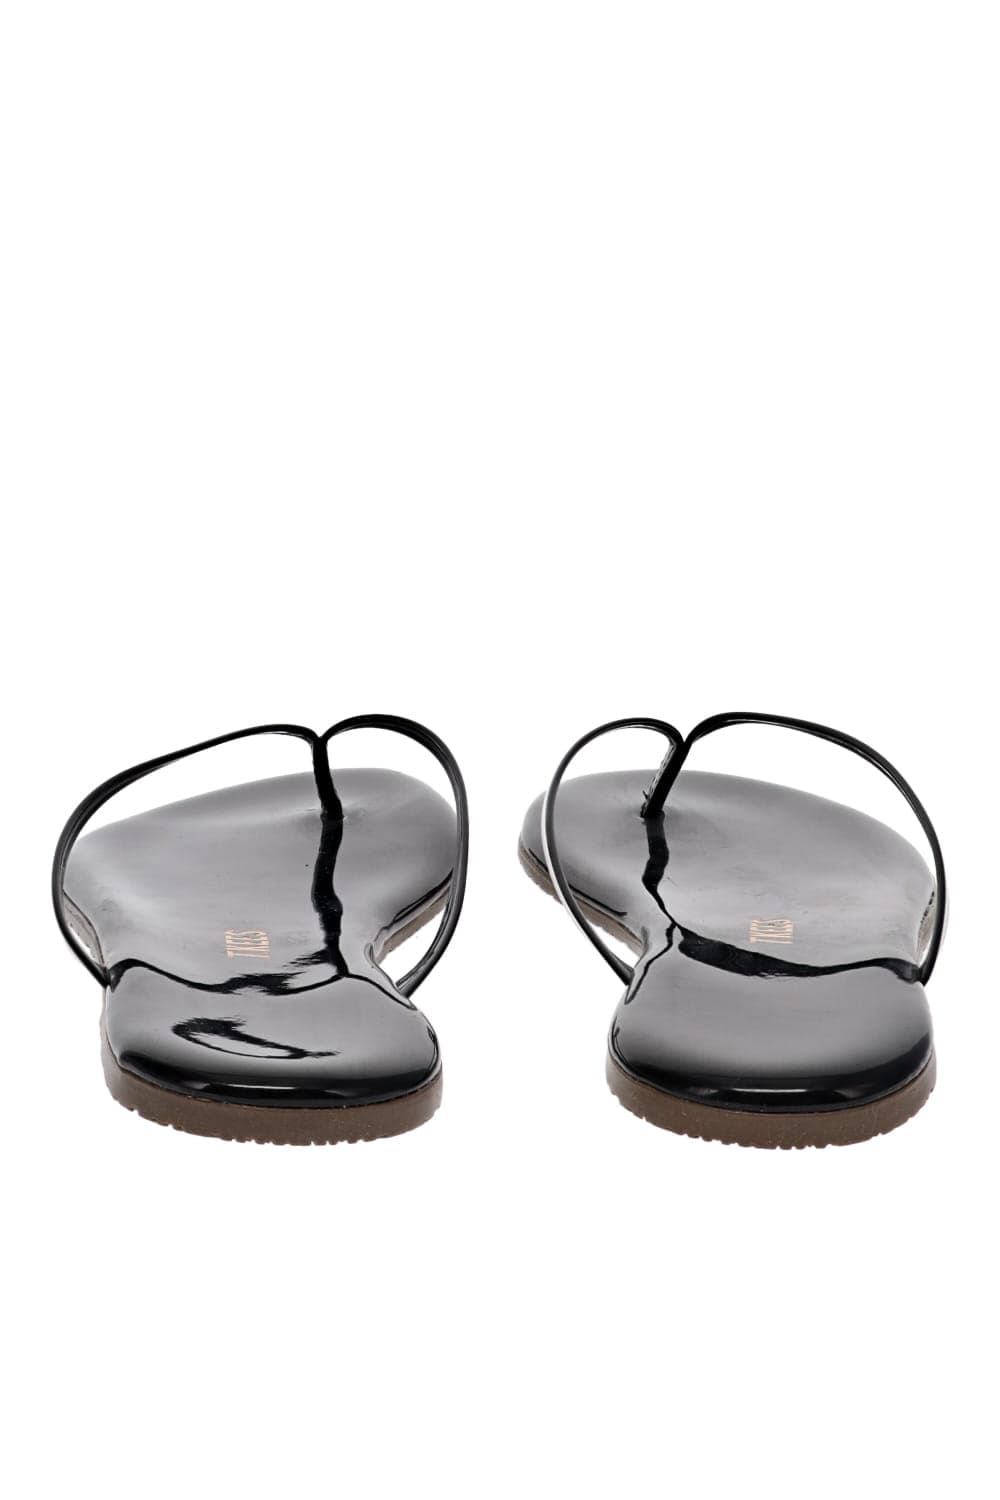 TKEES Glosses Licorice Leather Sandal